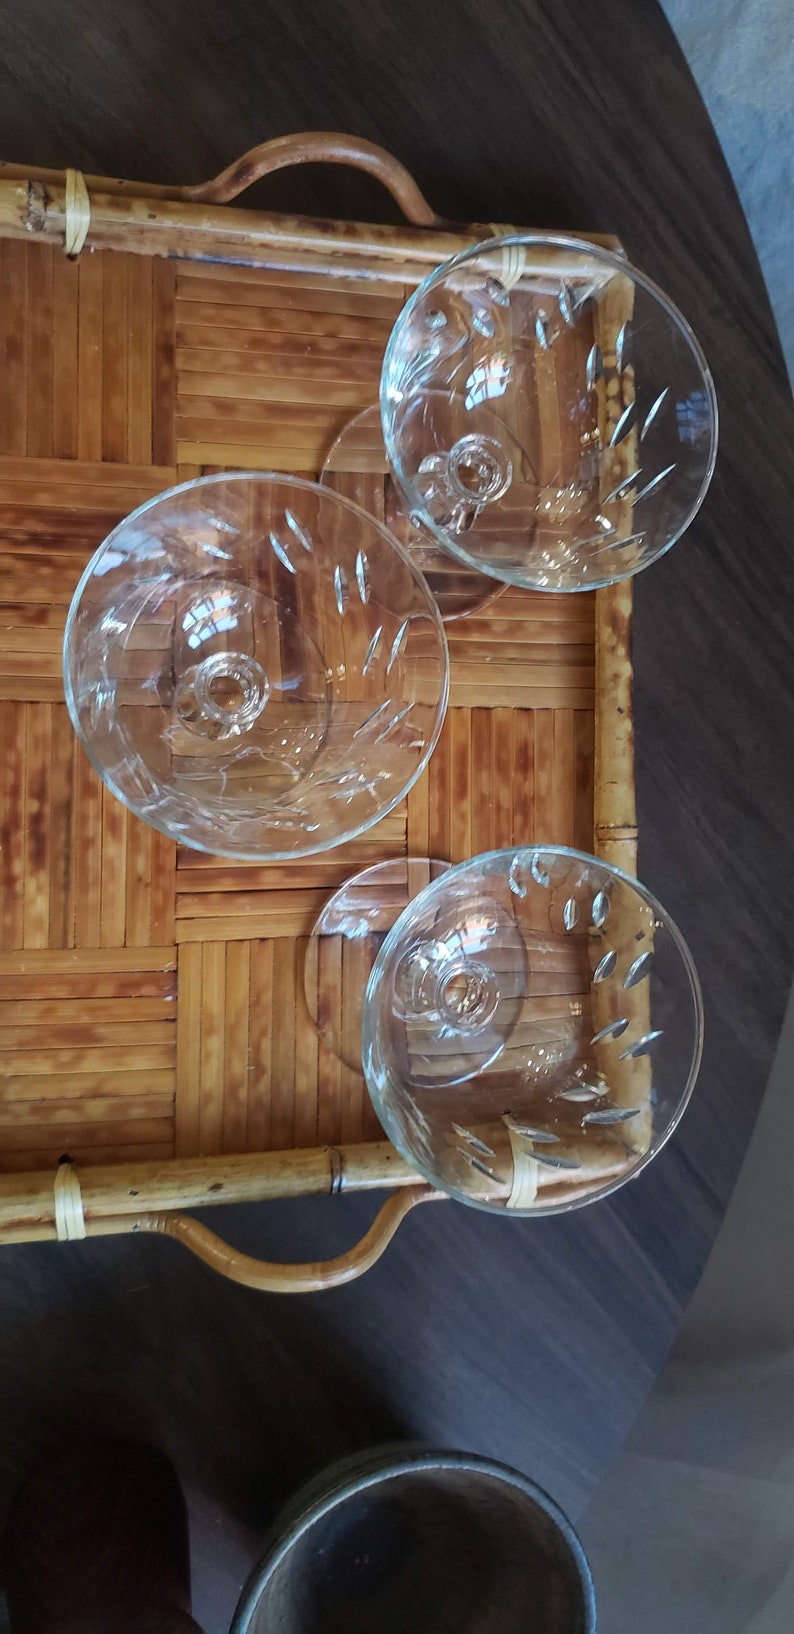 Vintage Libbey Colonial Heritage Cocktail Coupe, Vintage Coupe Glasses, Champagne Coupe, Etched Trio Glassware, Set of 3 imagen 3